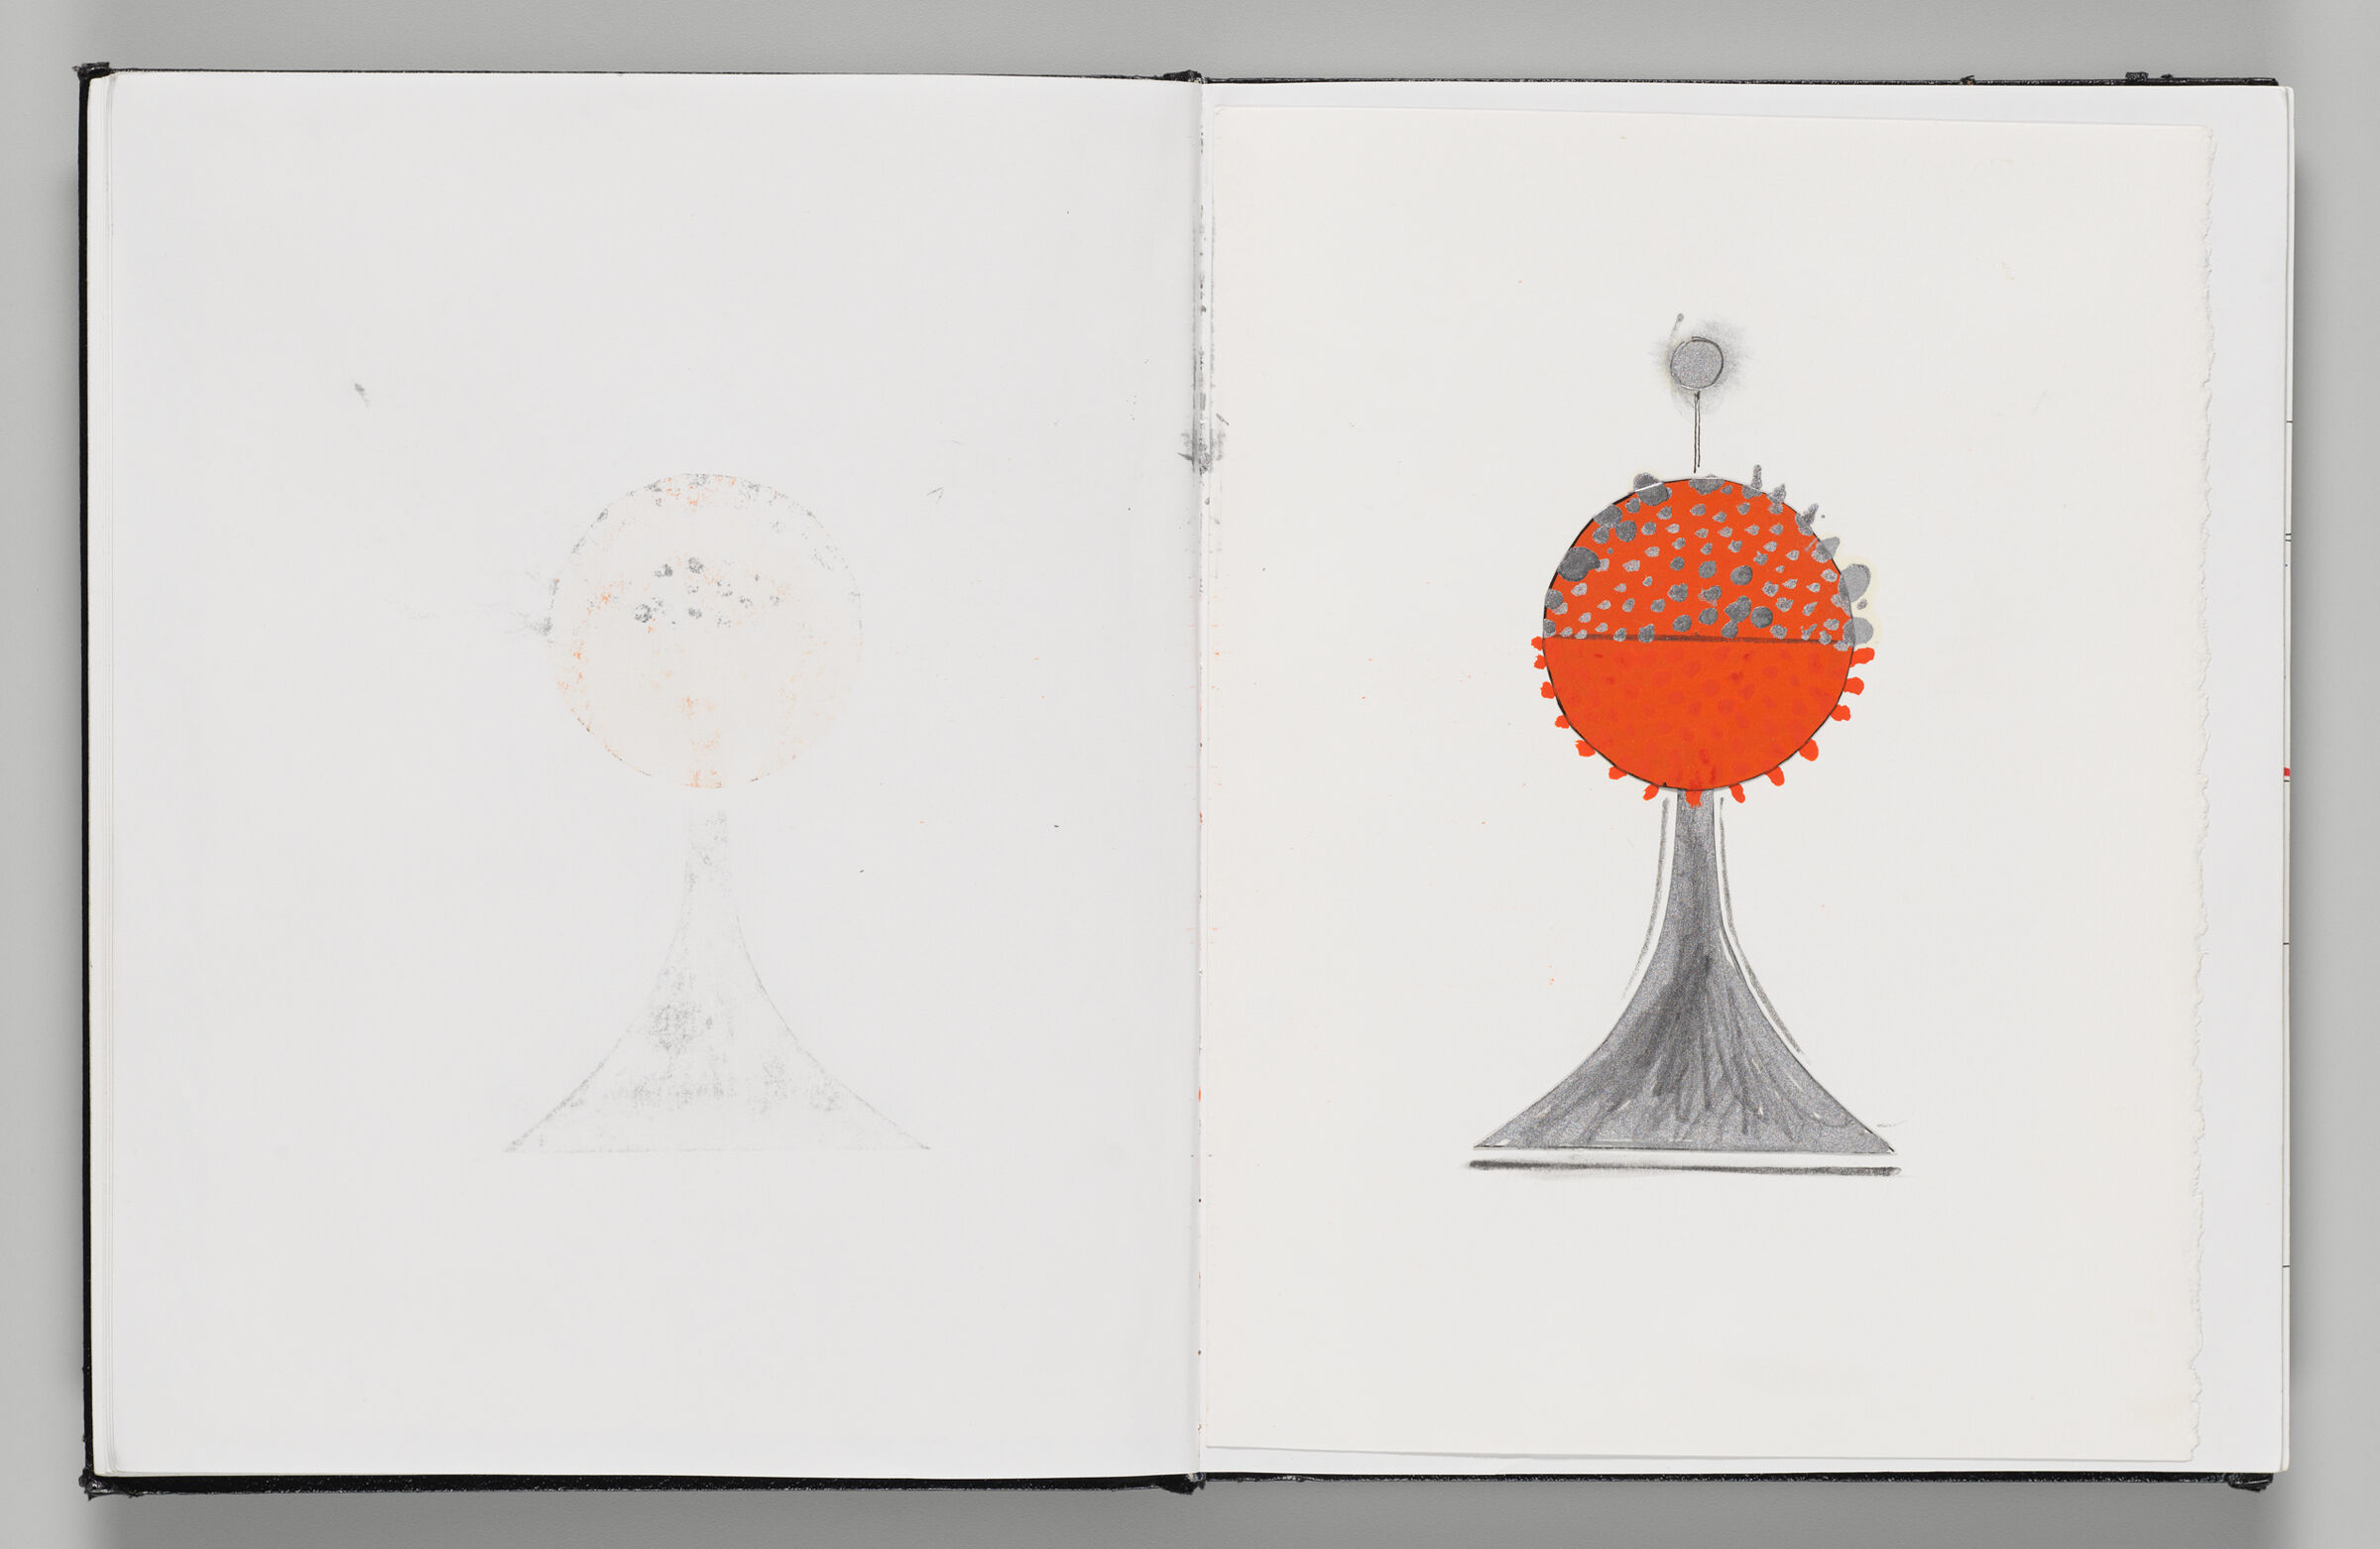 Untitled (Blank, Left Page); Untitled (Adhered Collage Of Neon Sculpture, Right Page)